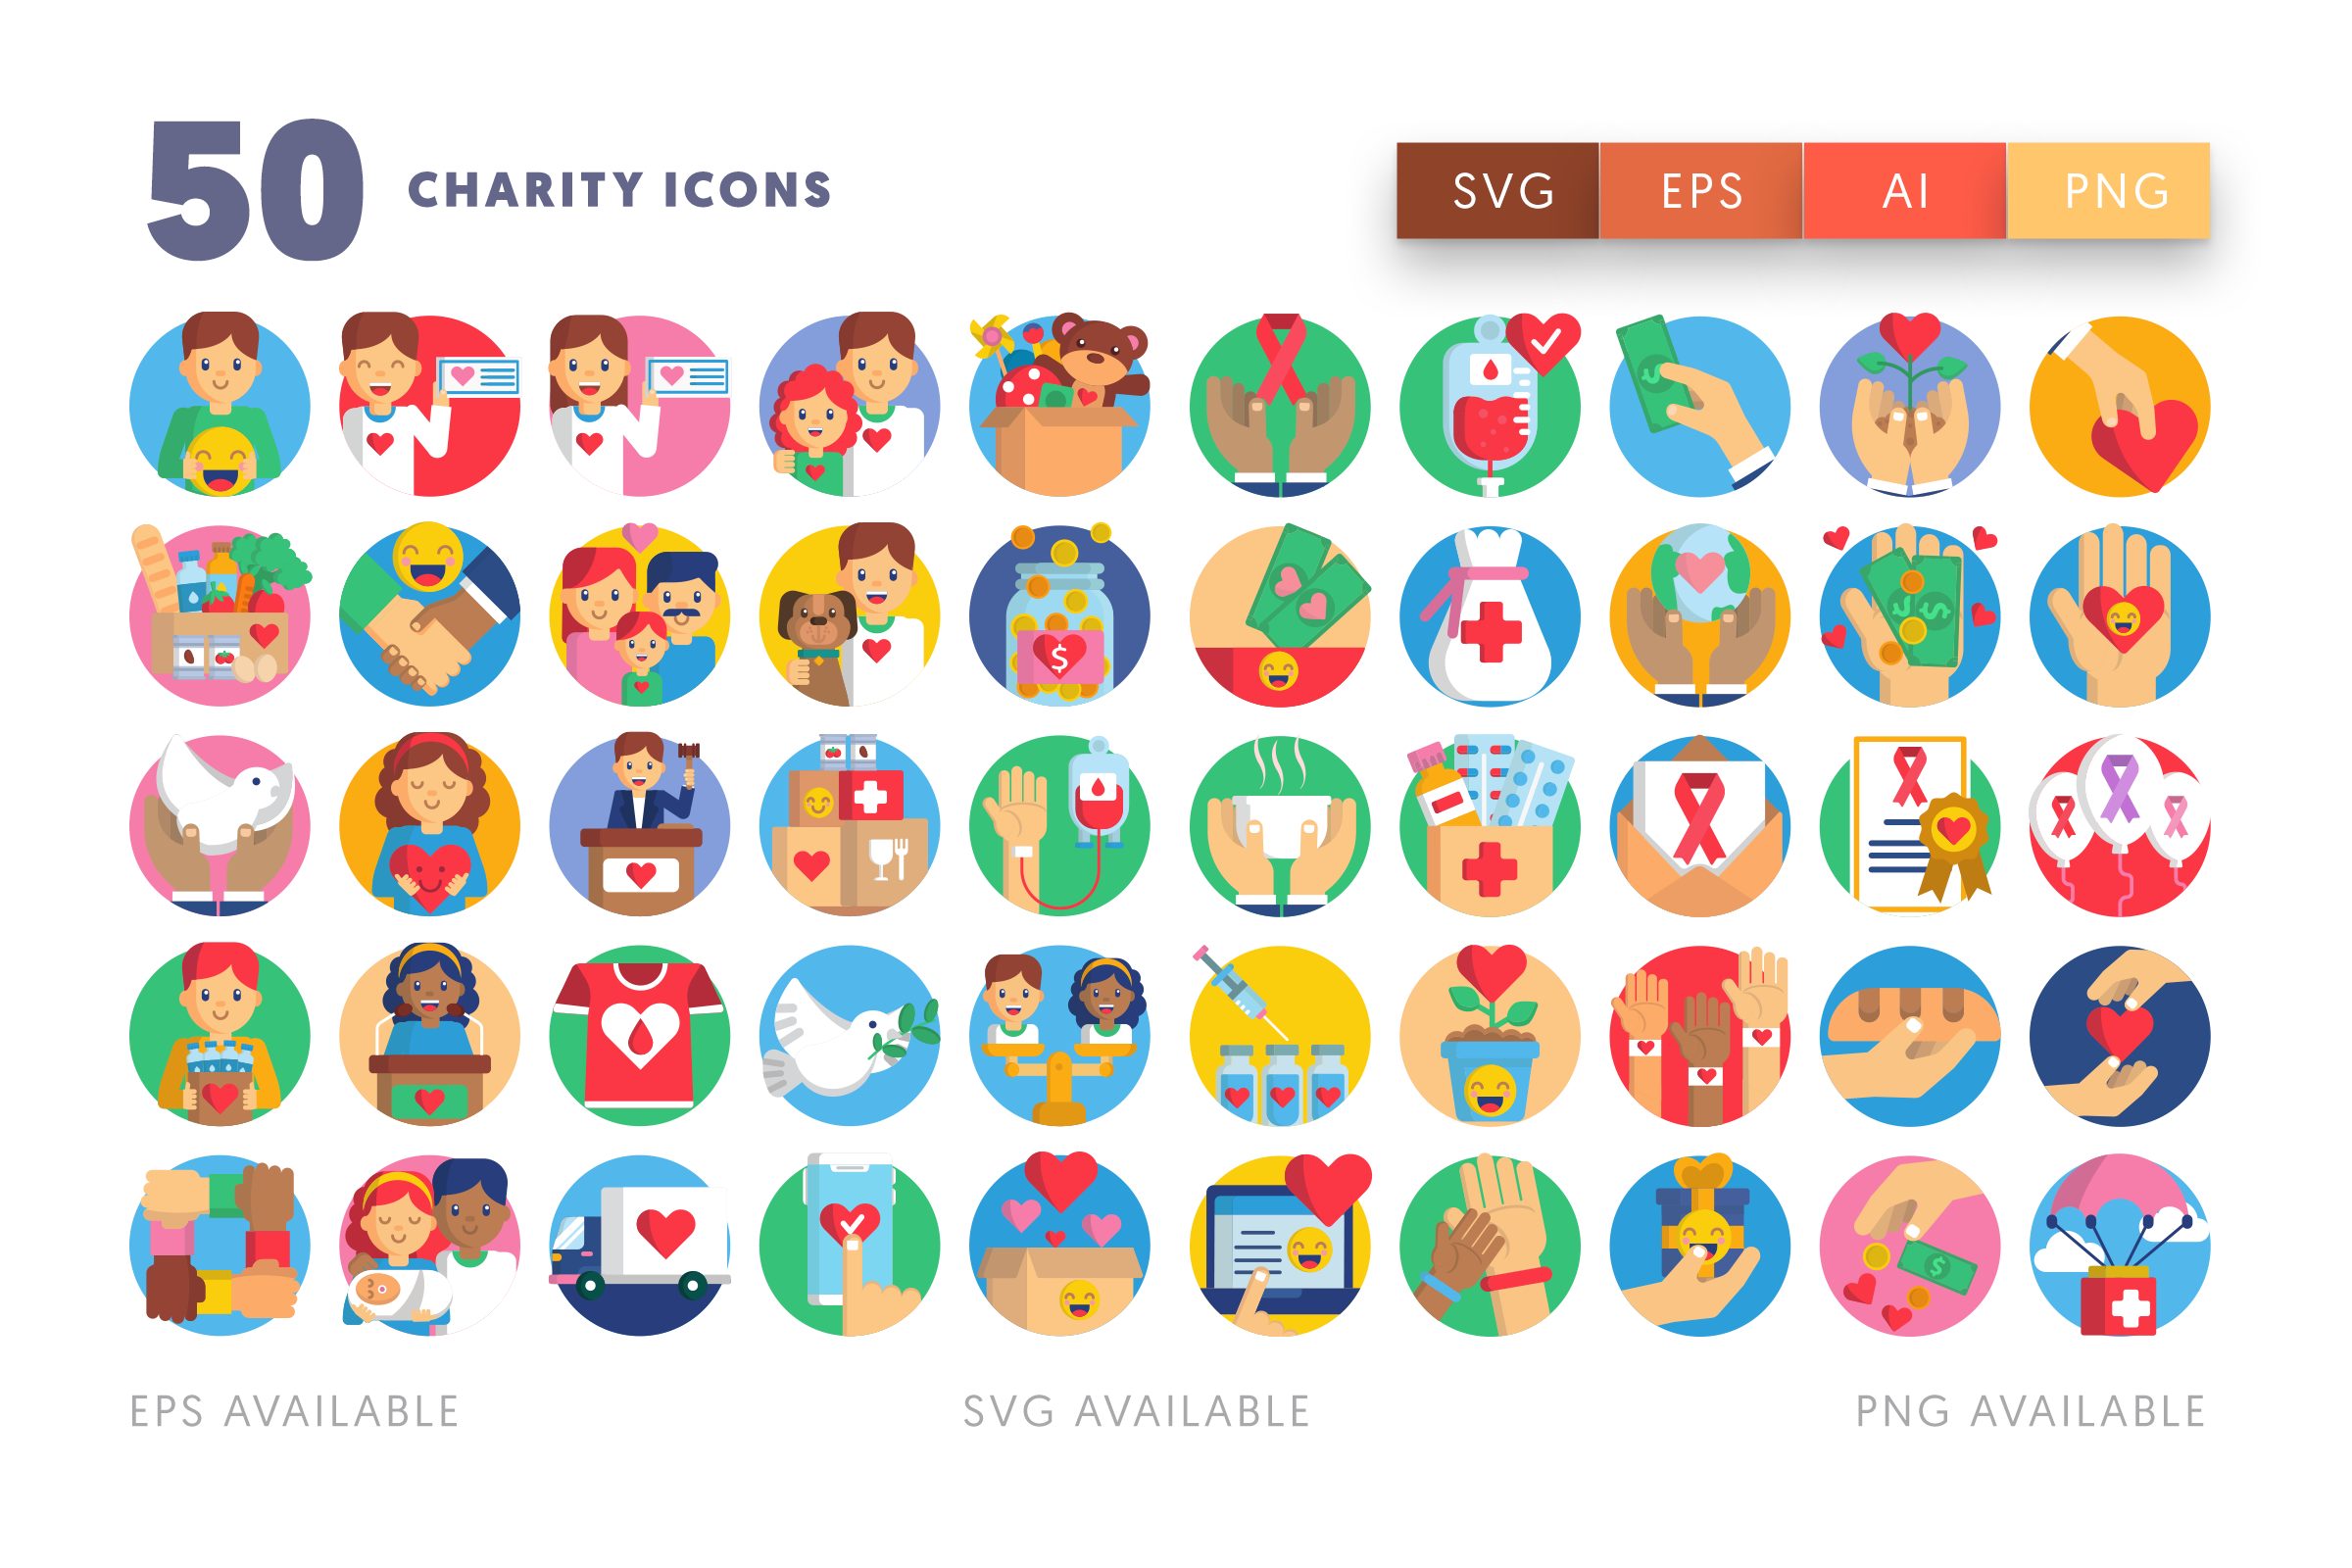 Charity icons png/svg/eps